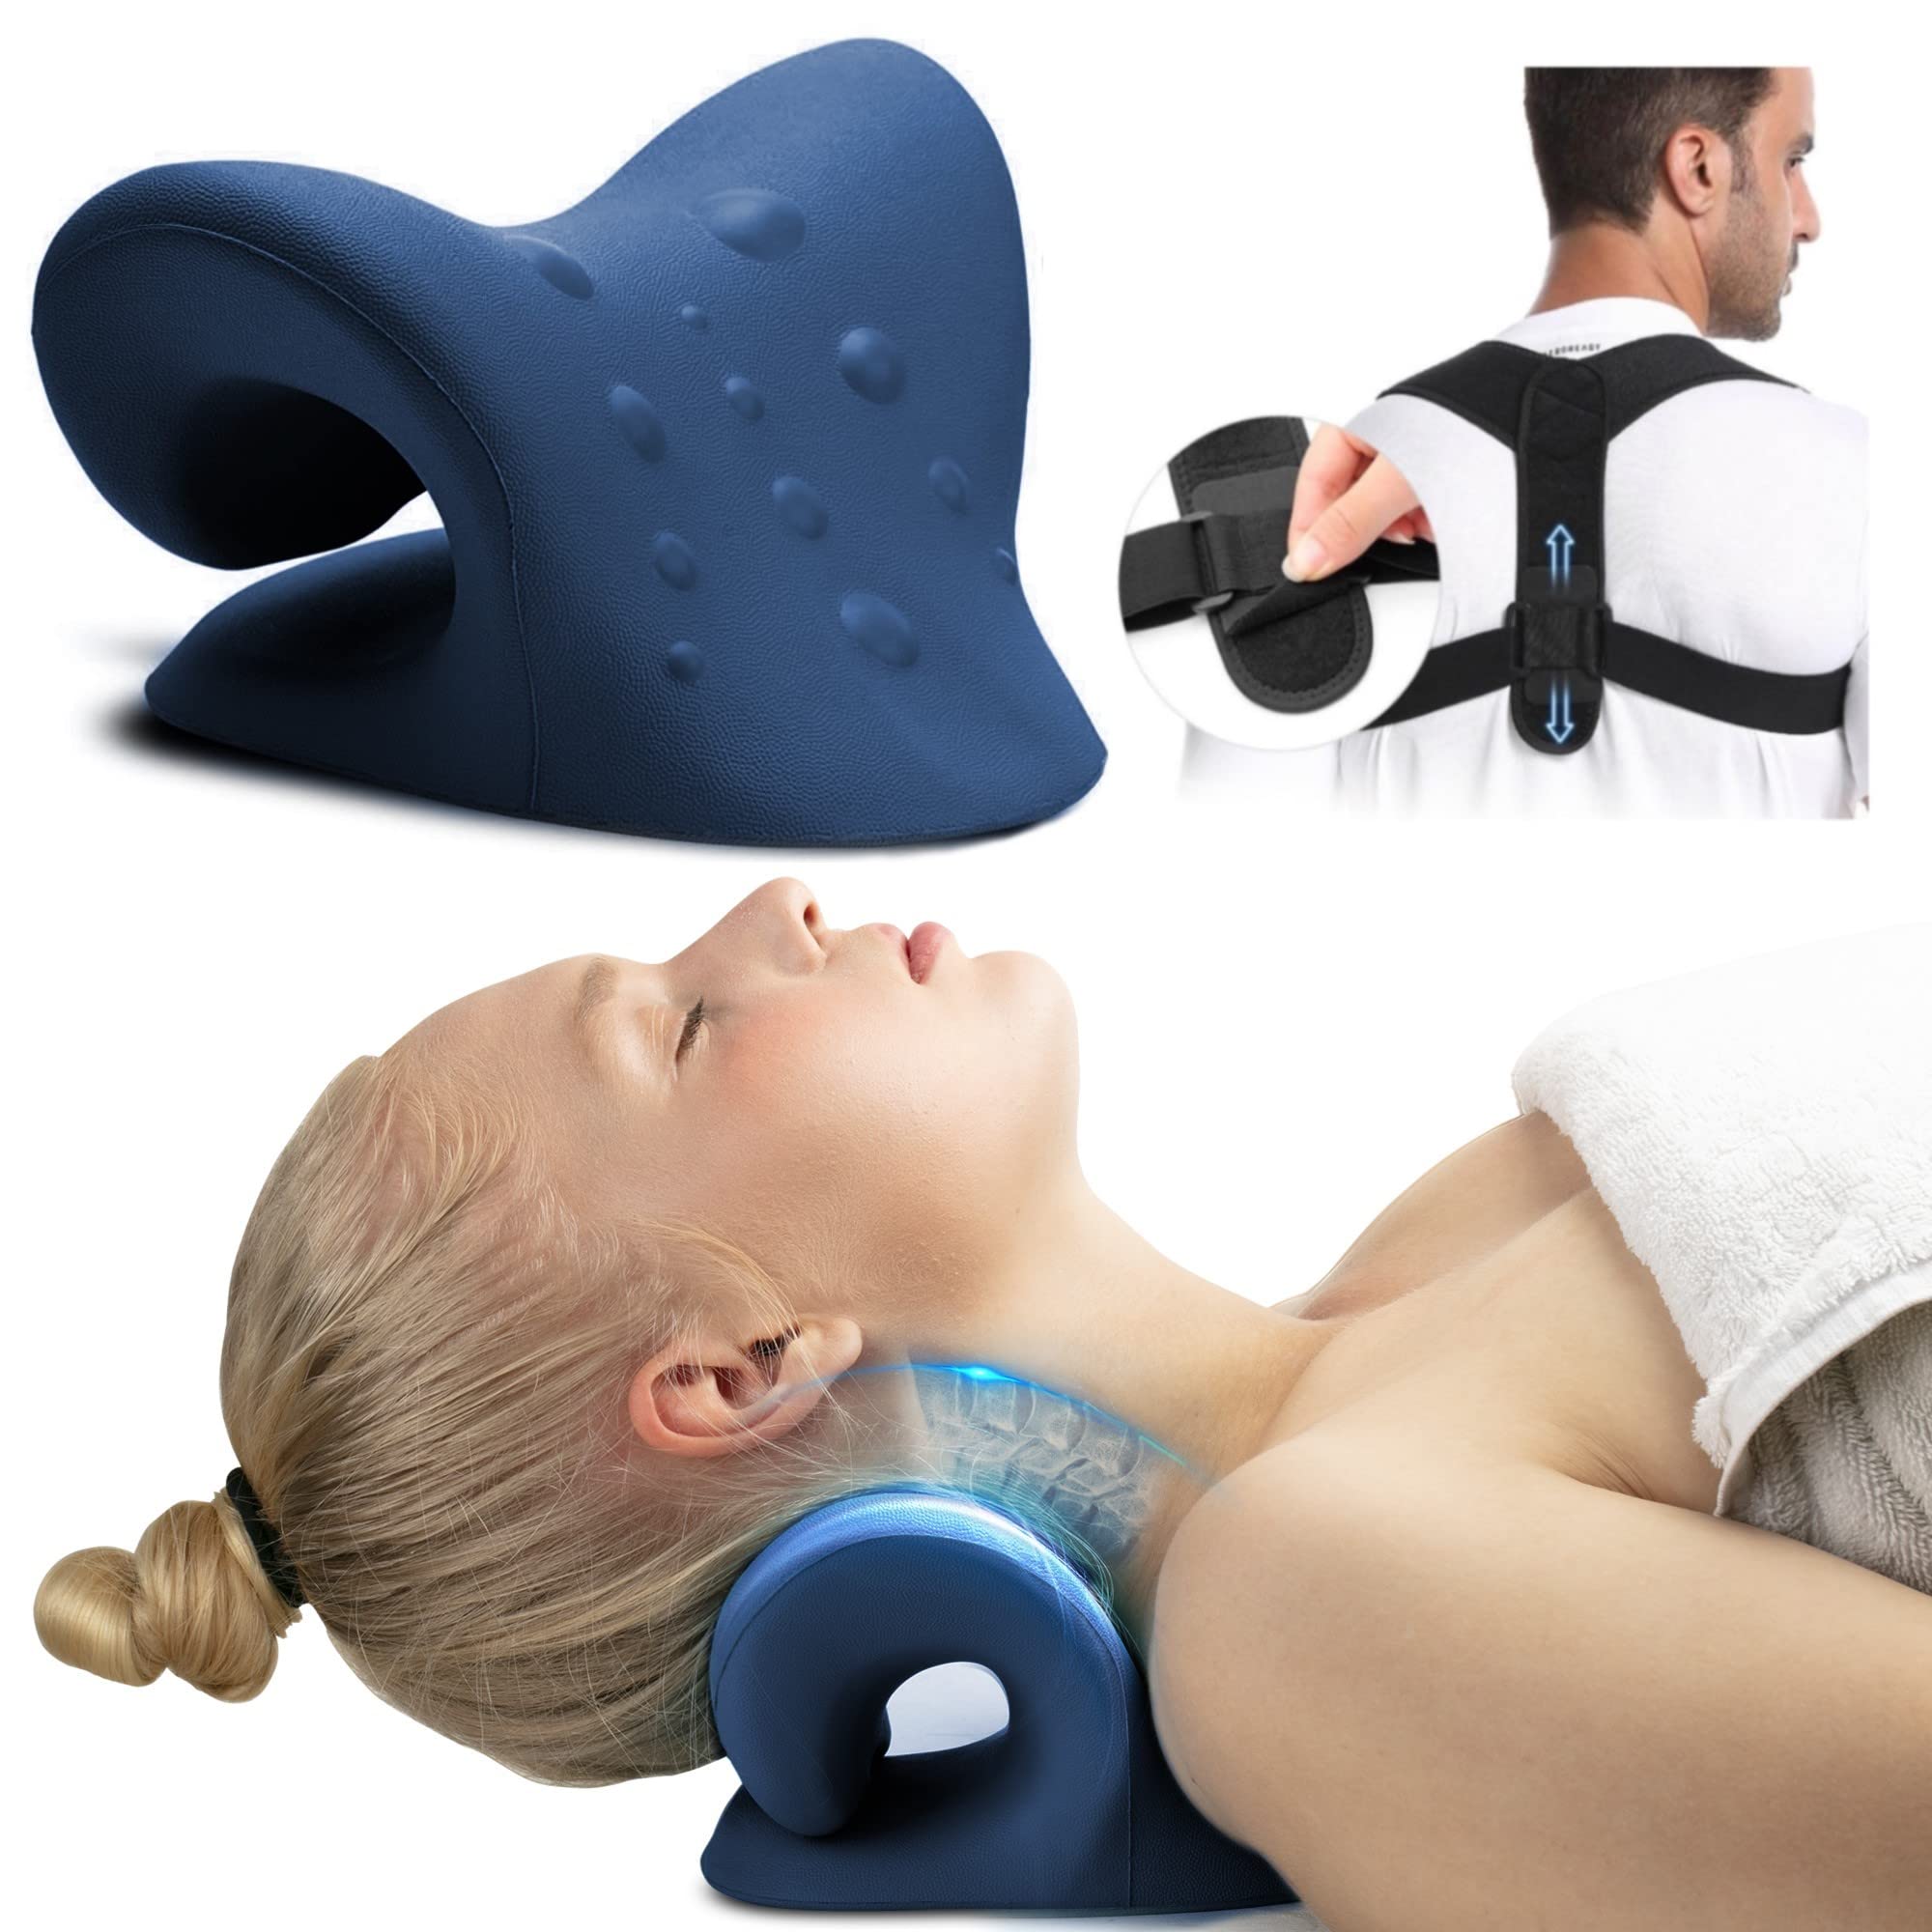 HSA Medical Device, FSA Approved Pillows